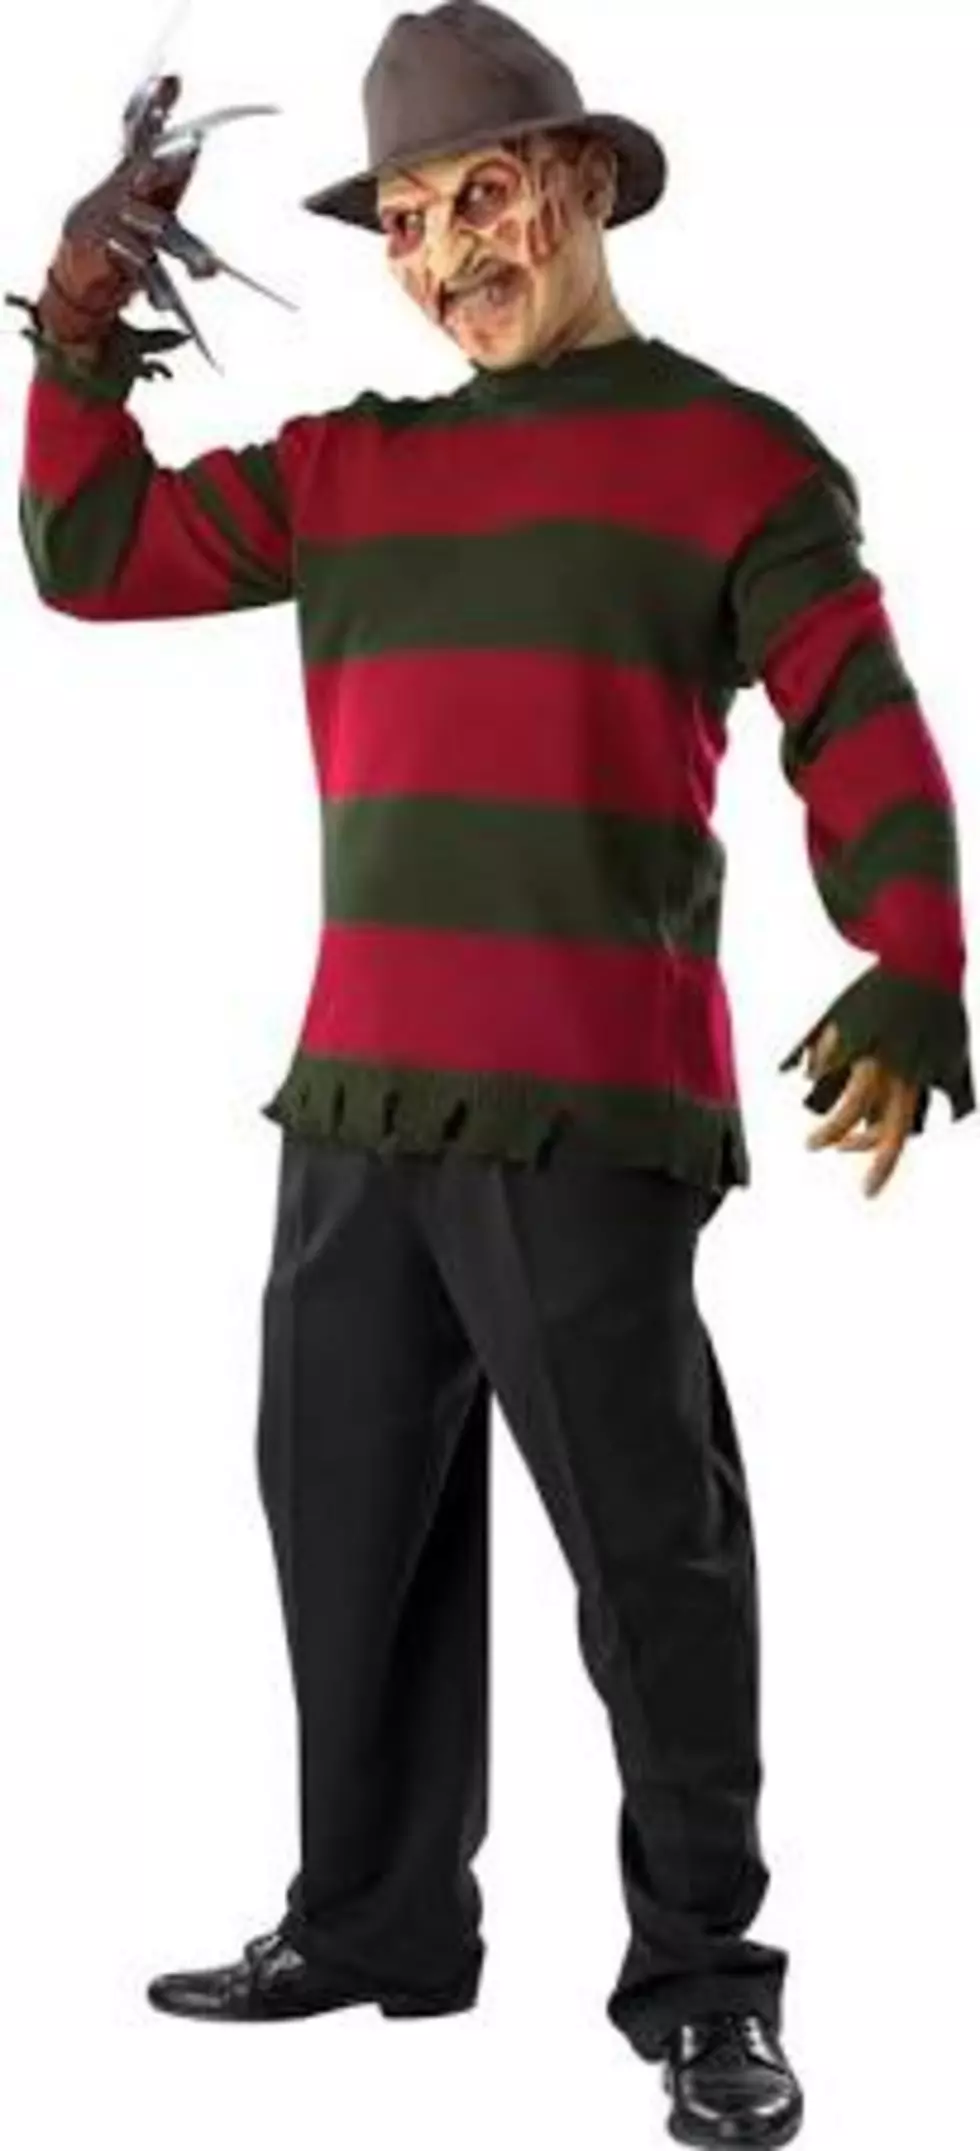 Man Dressed As Freddy Krueger Shoots 5 People At Halloween Party